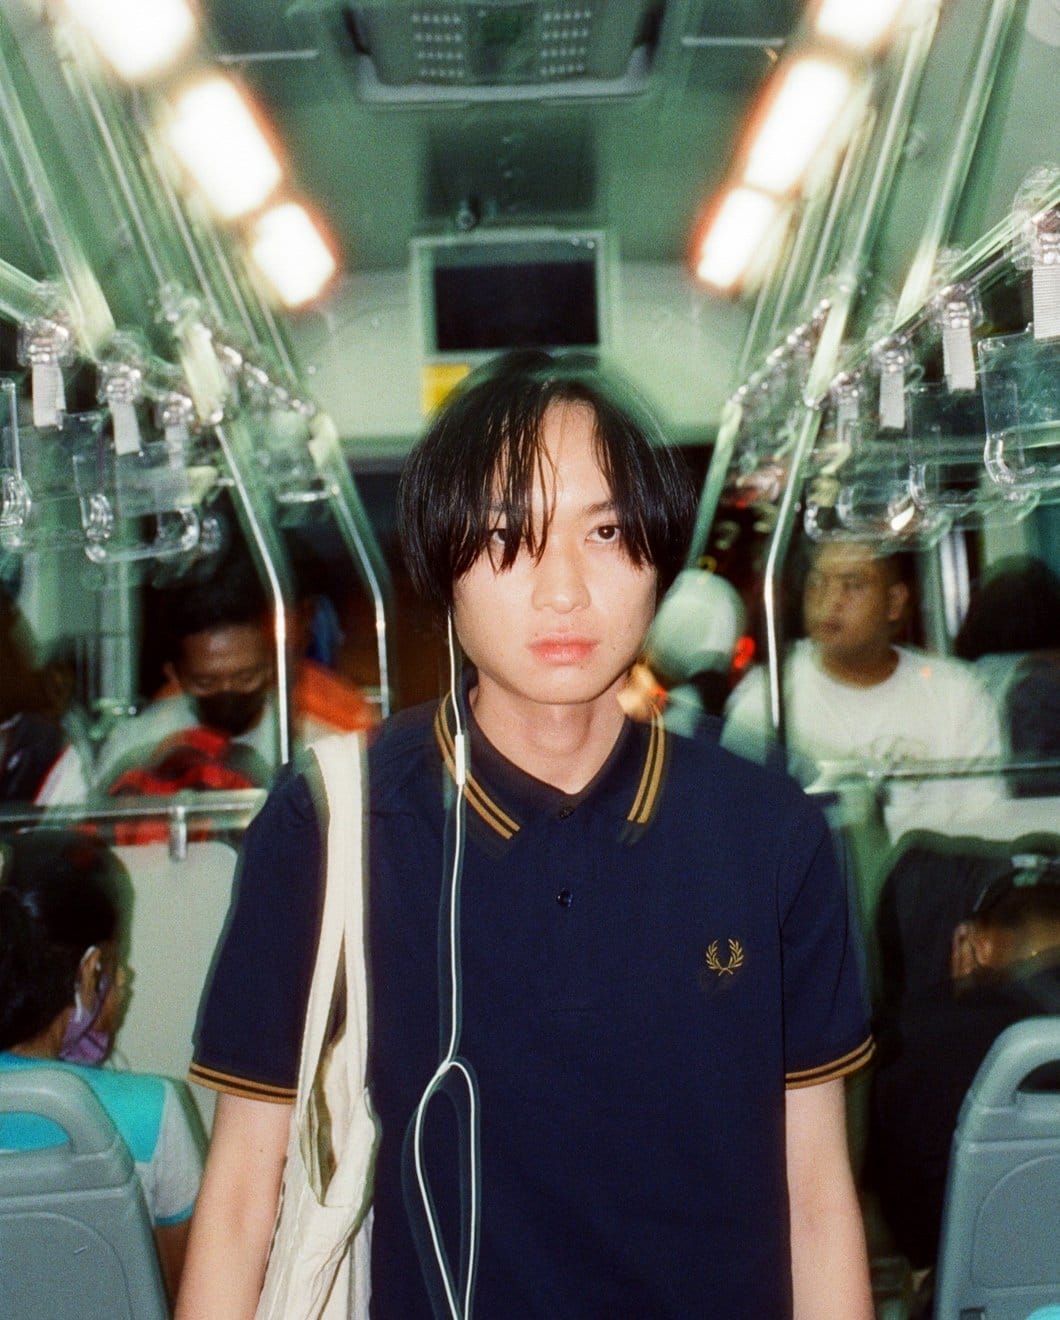 Asian male model wearing a navy, twin tipped Fred Perry shirt on the subway